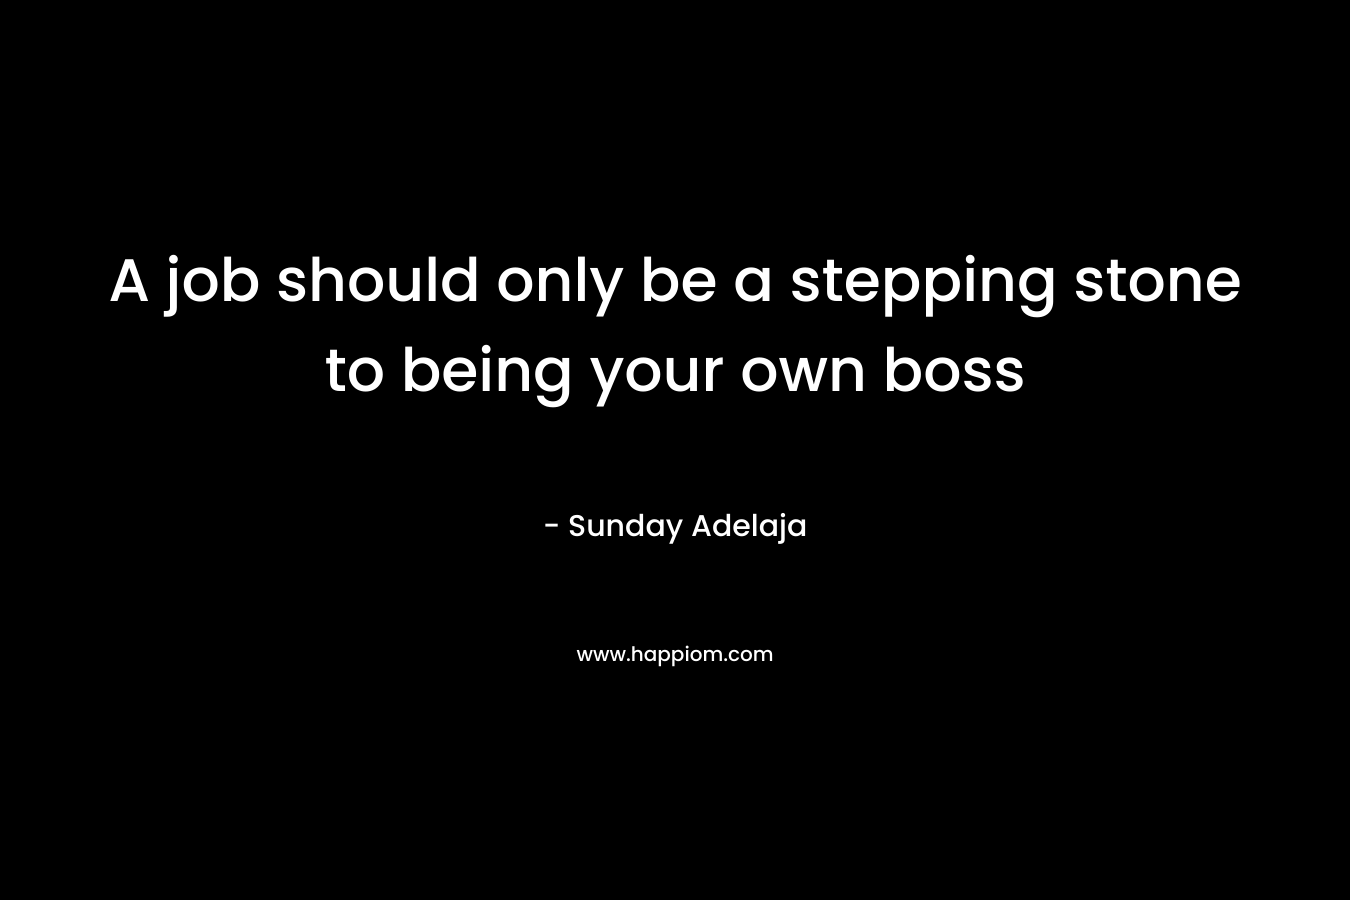 A job should only be a stepping stone to being your own boss